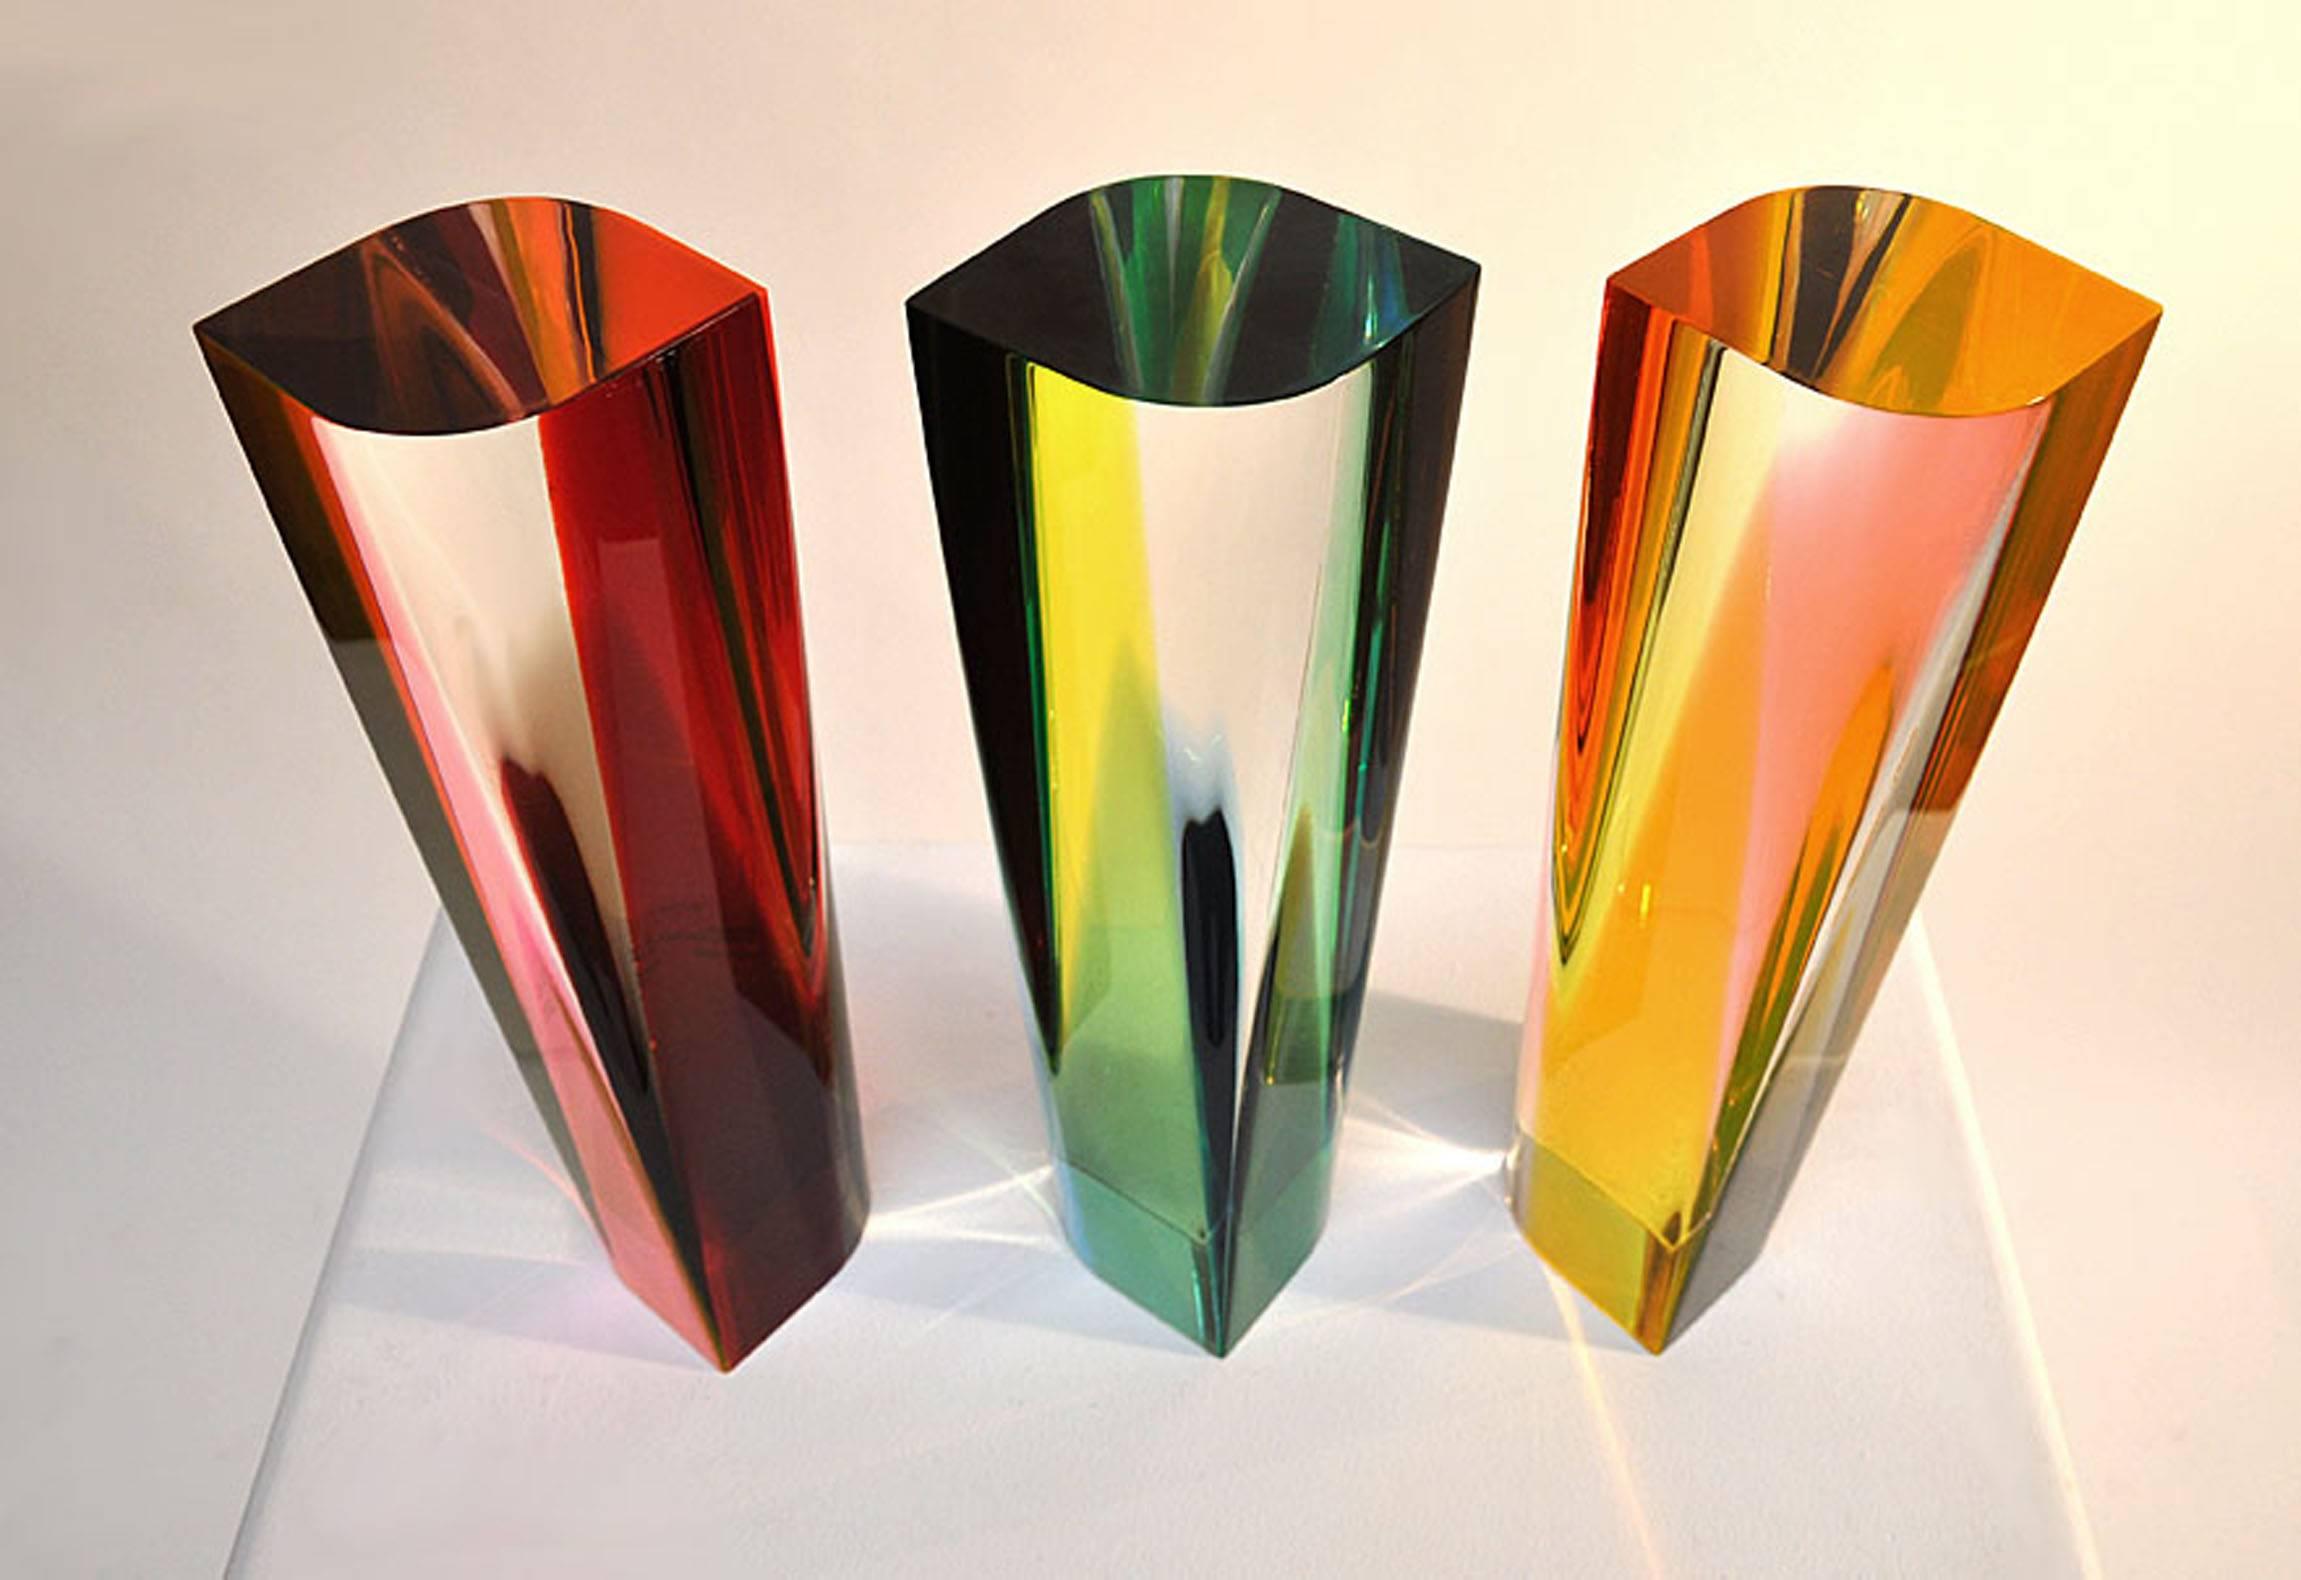 Three-piece solid cast acrylic fine art sculpture signed: M. Jones 1976. The colors change depending on the perspective. Dynamic modern sculpture. Price is for the three pieces.